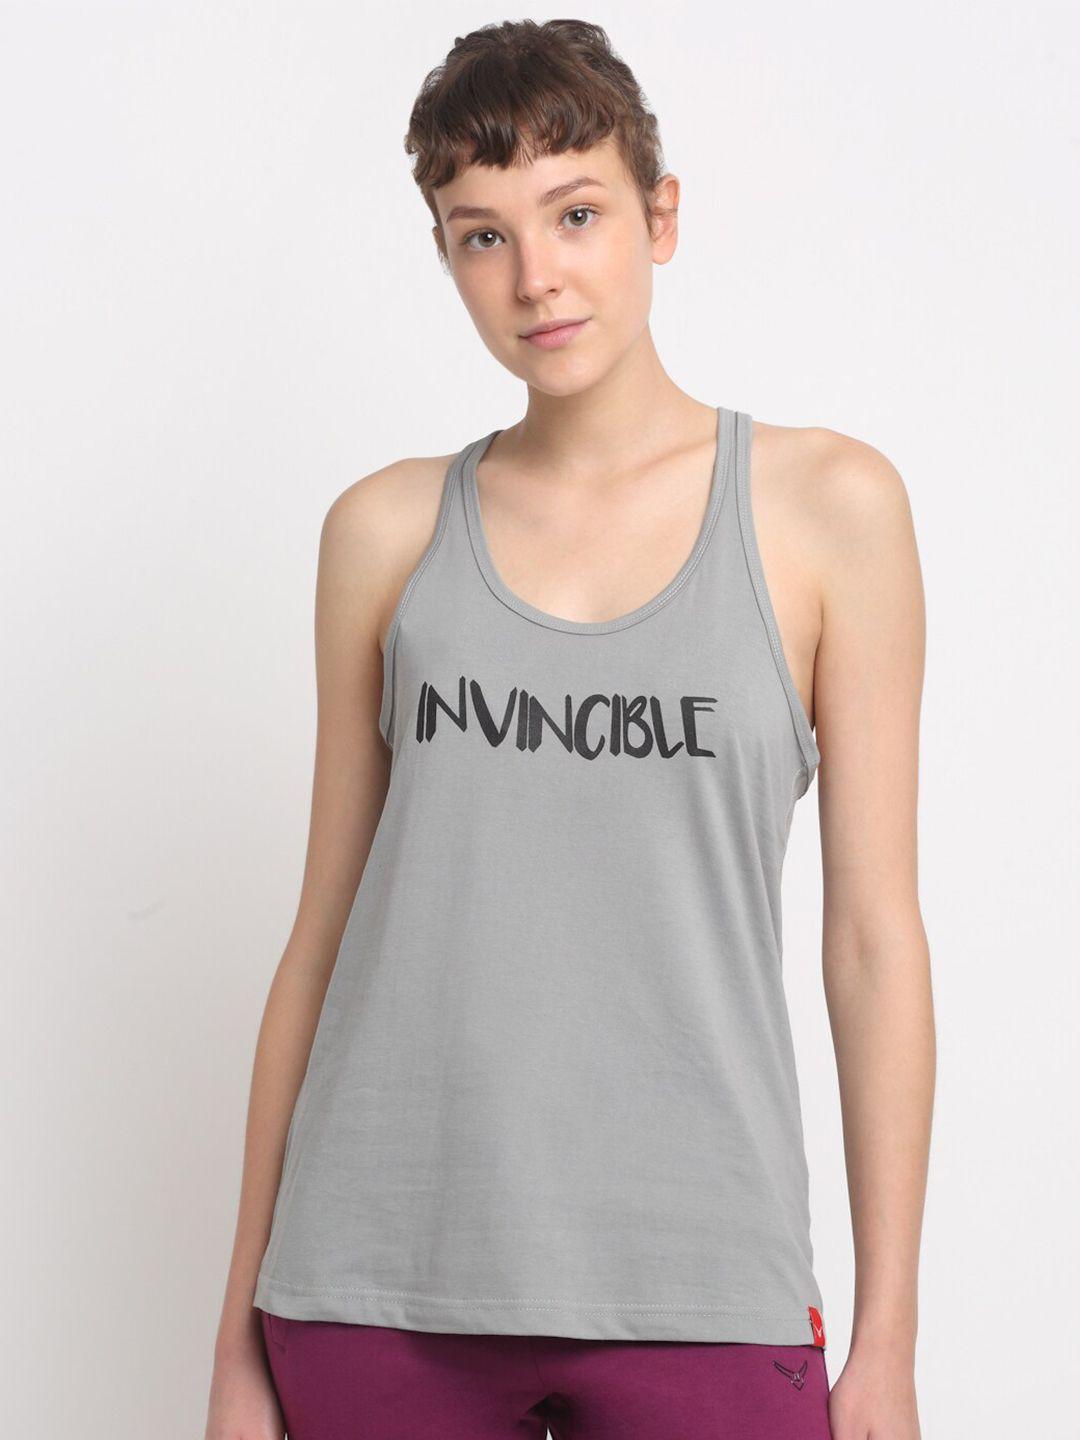 invincible women typography printed cotton dri-fit training or gym sports t-shirt